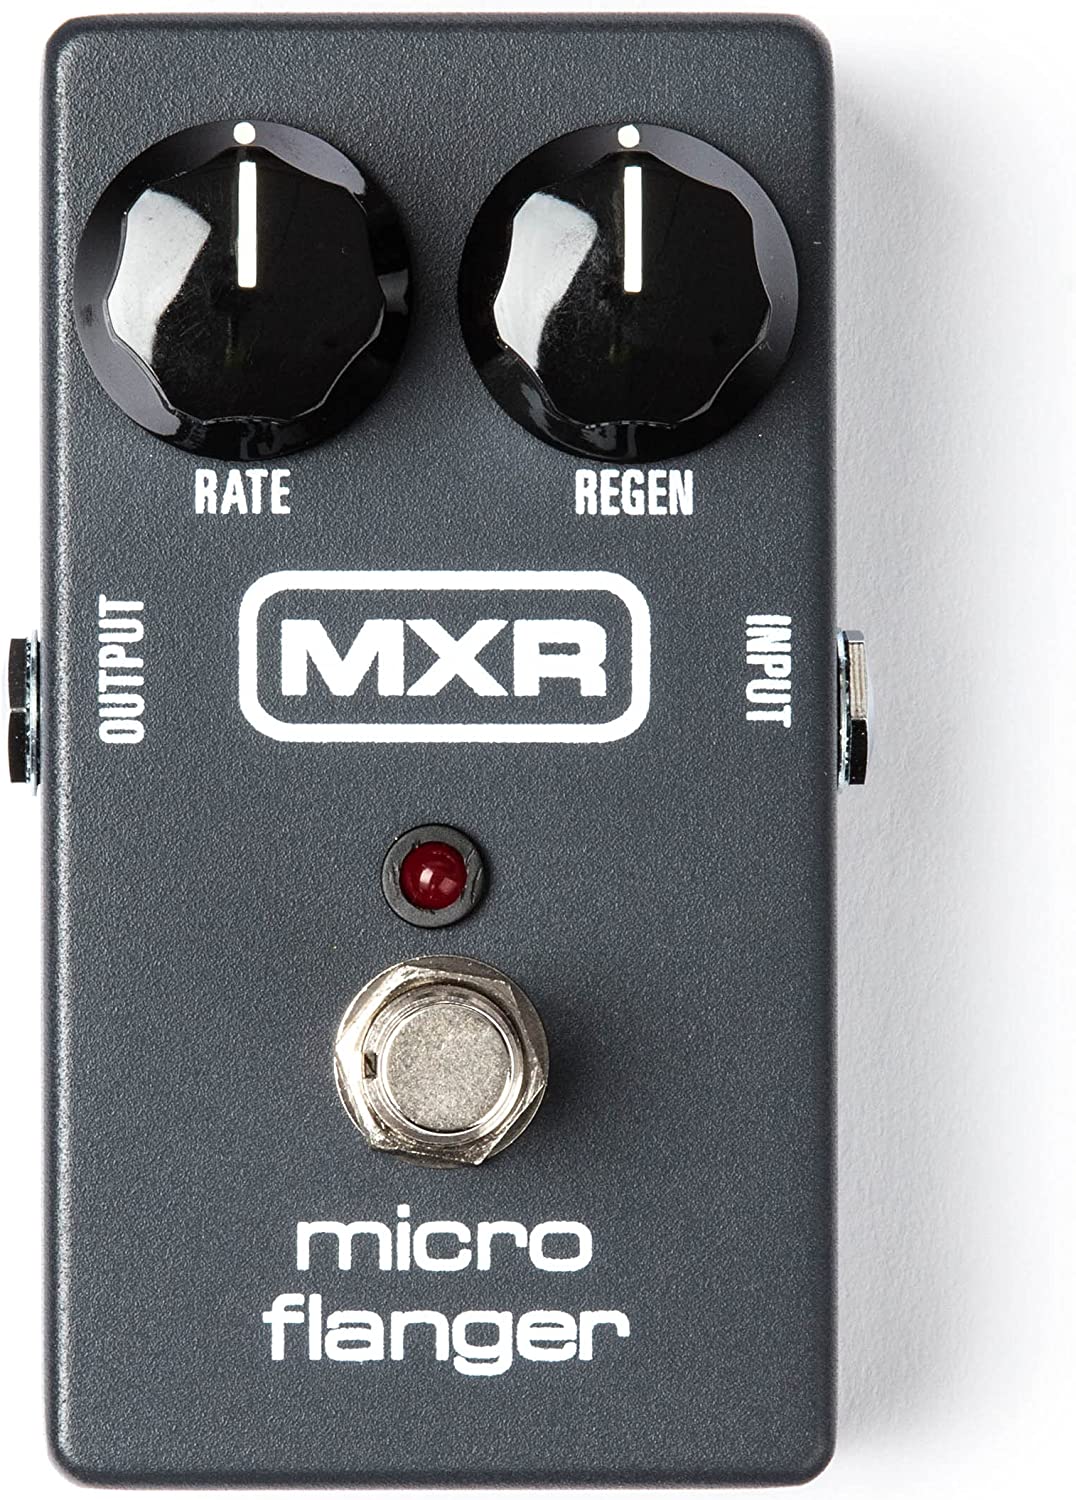 MXR Micro Flanger Pedal on a white background